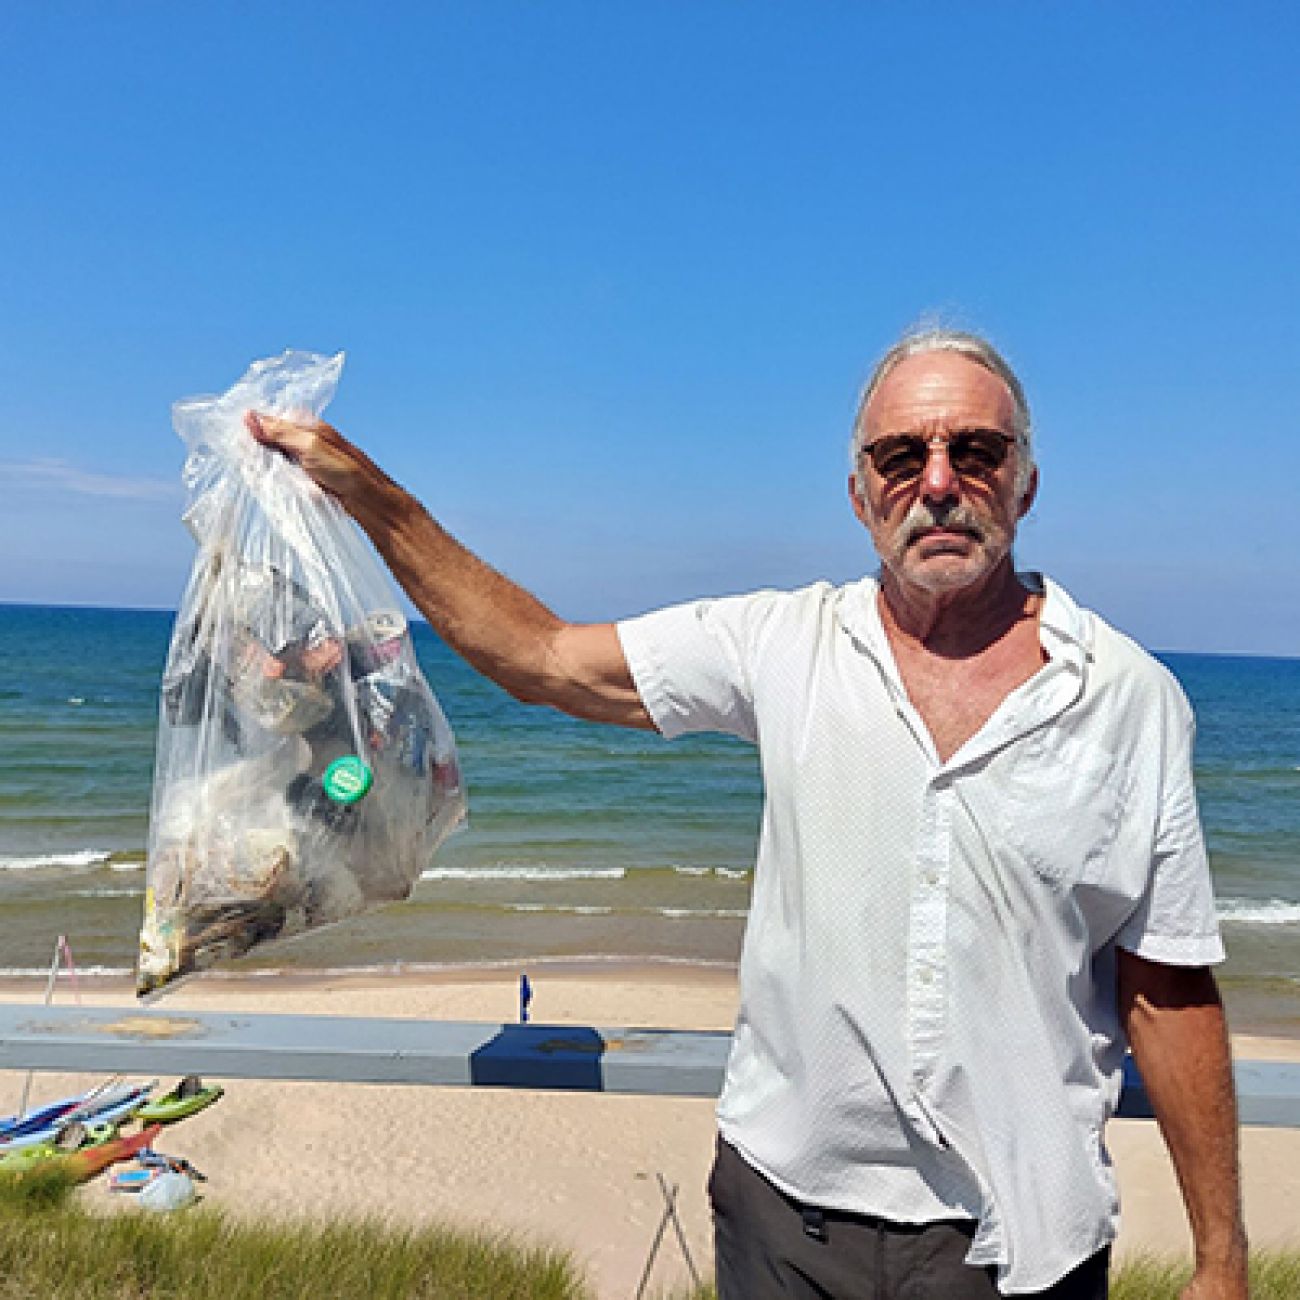 man holding a bag of trash, beach in the background